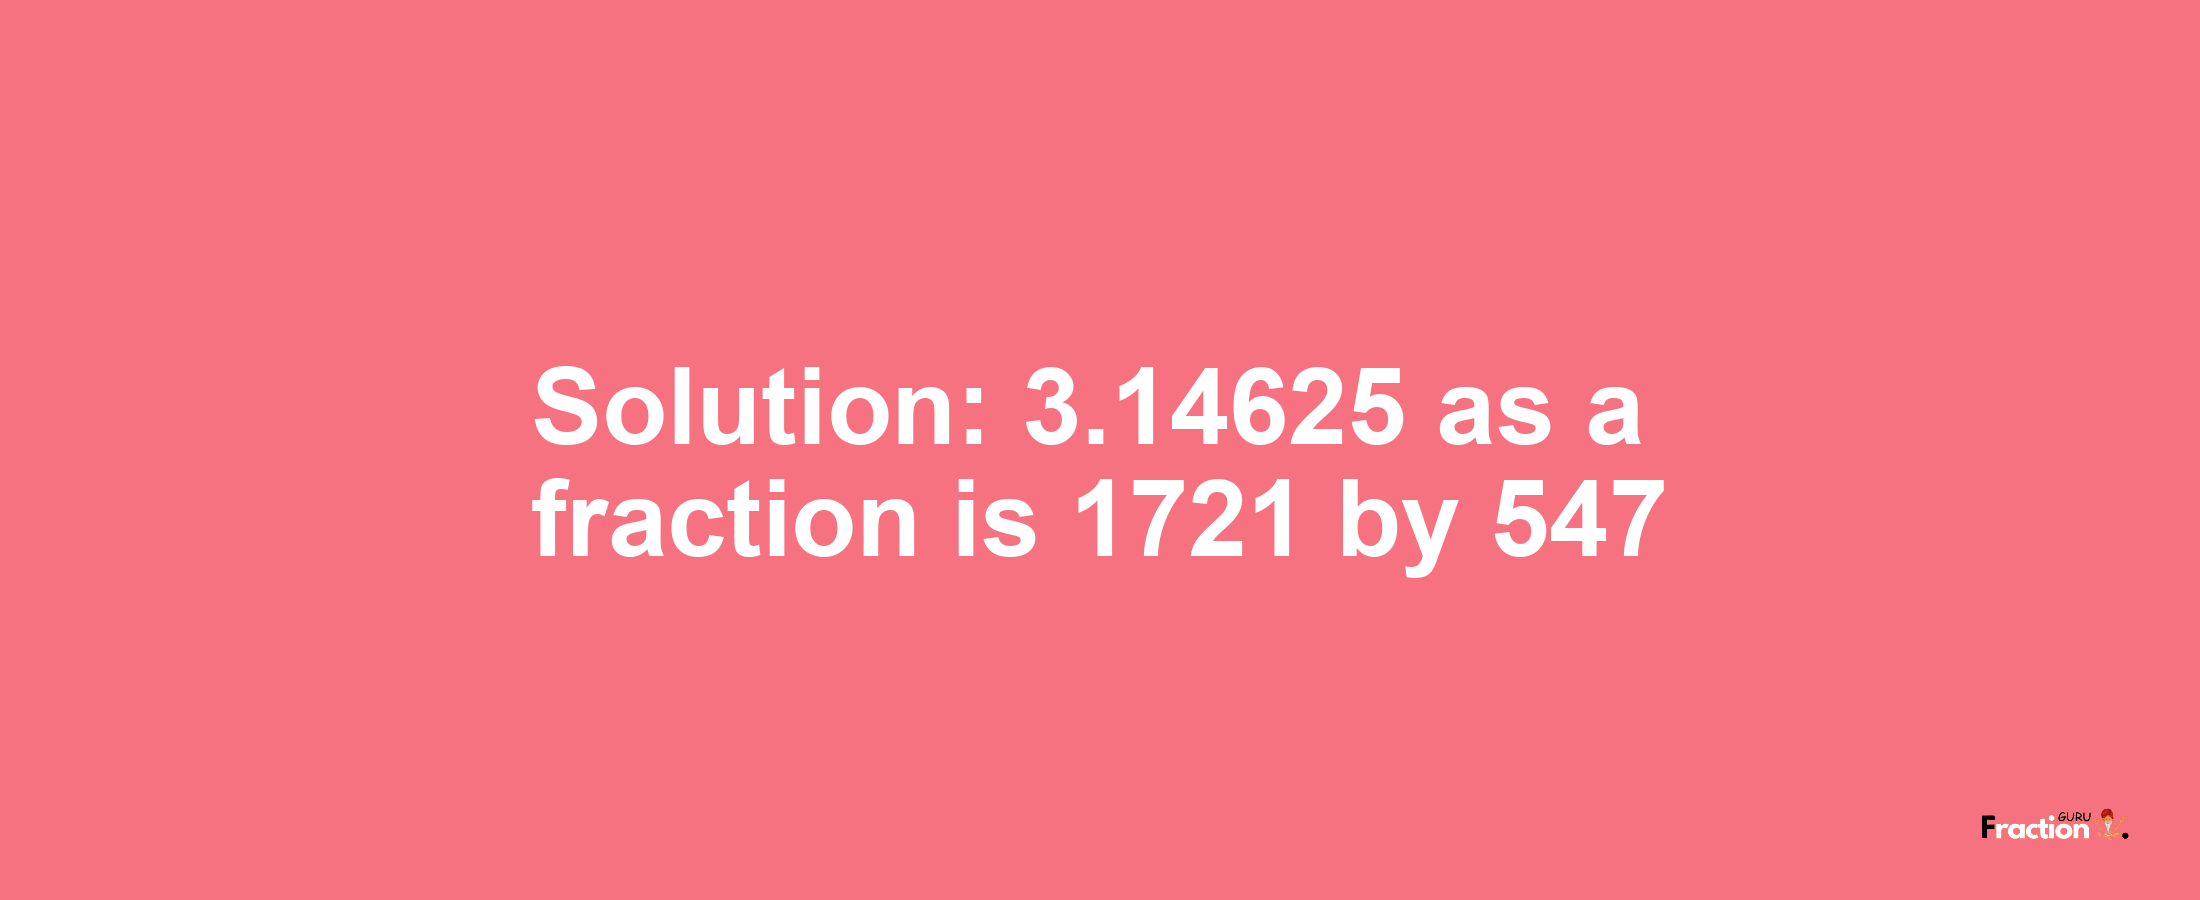 Solution:3.14625 as a fraction is 1721/547